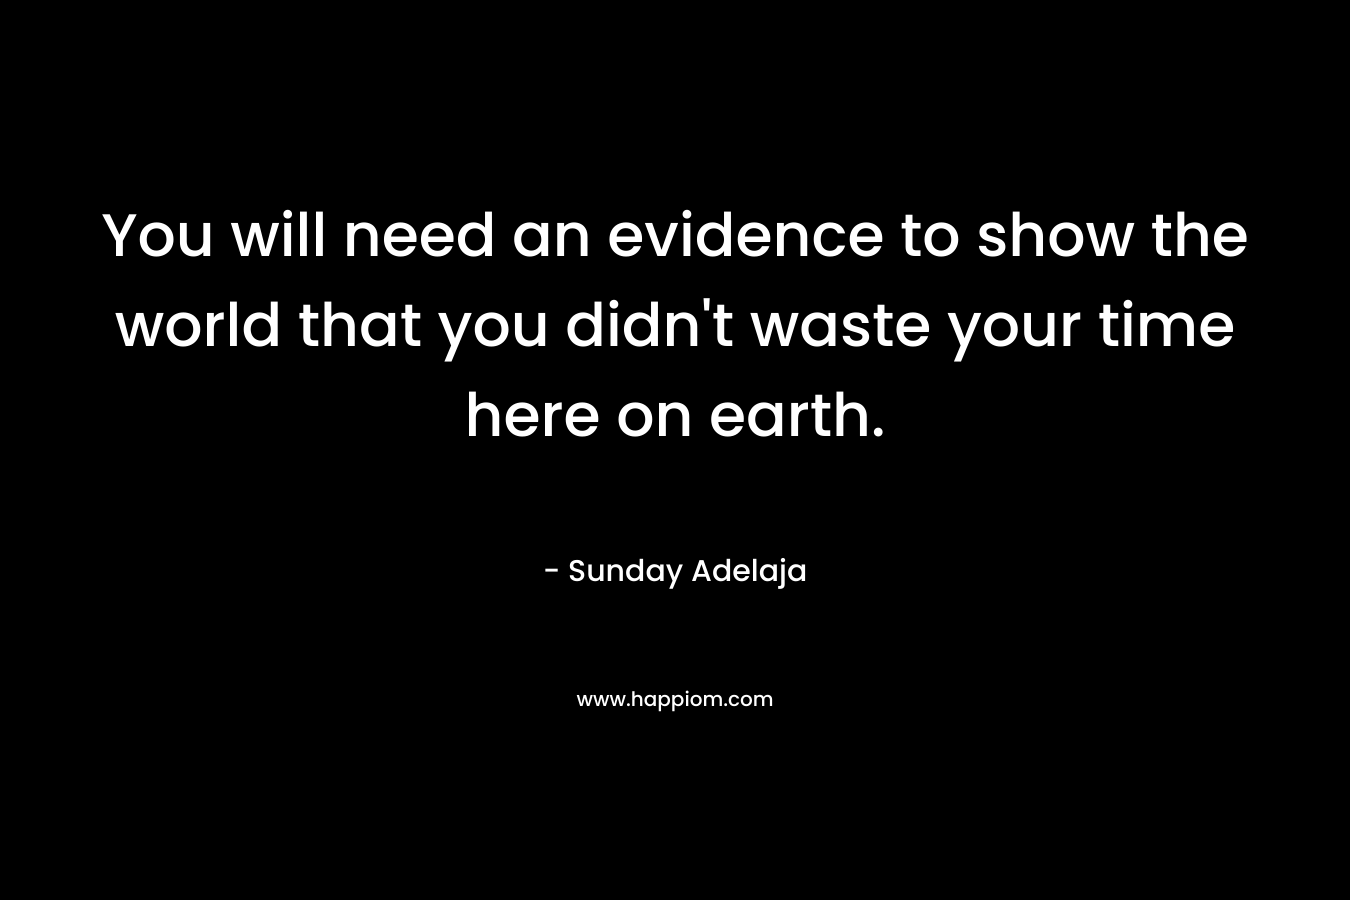 You will need an evidence to show the world that you didn't waste your time here on earth.